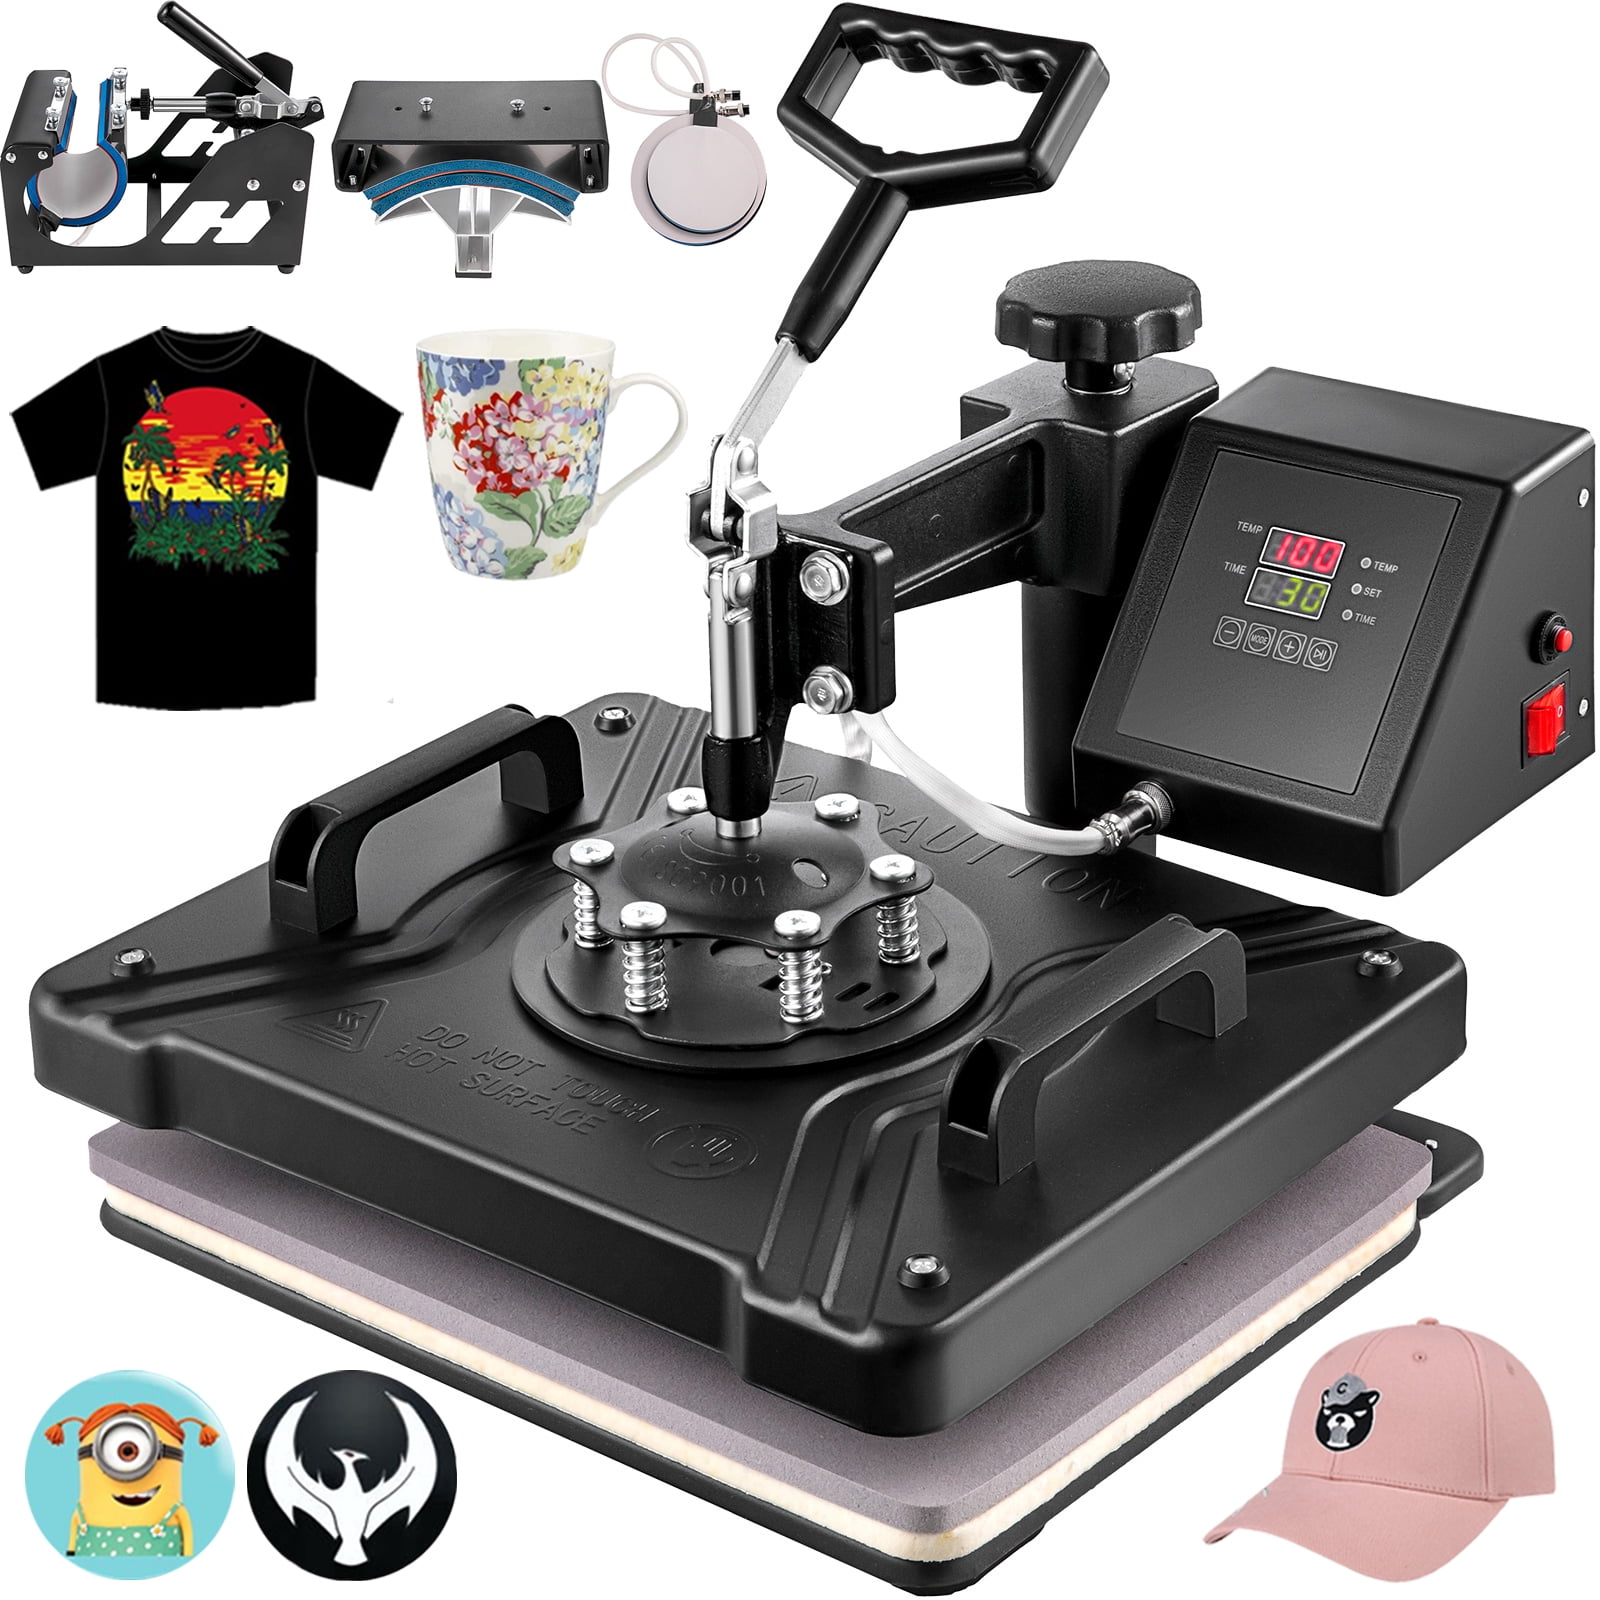 VEVOR Heat Press 15x12 Inch 5/6/8 in 1 Digital Multifunctional Sublimation  360 Degree Rotation for T Shirts Hat Mug Cap Plate - AliExpress